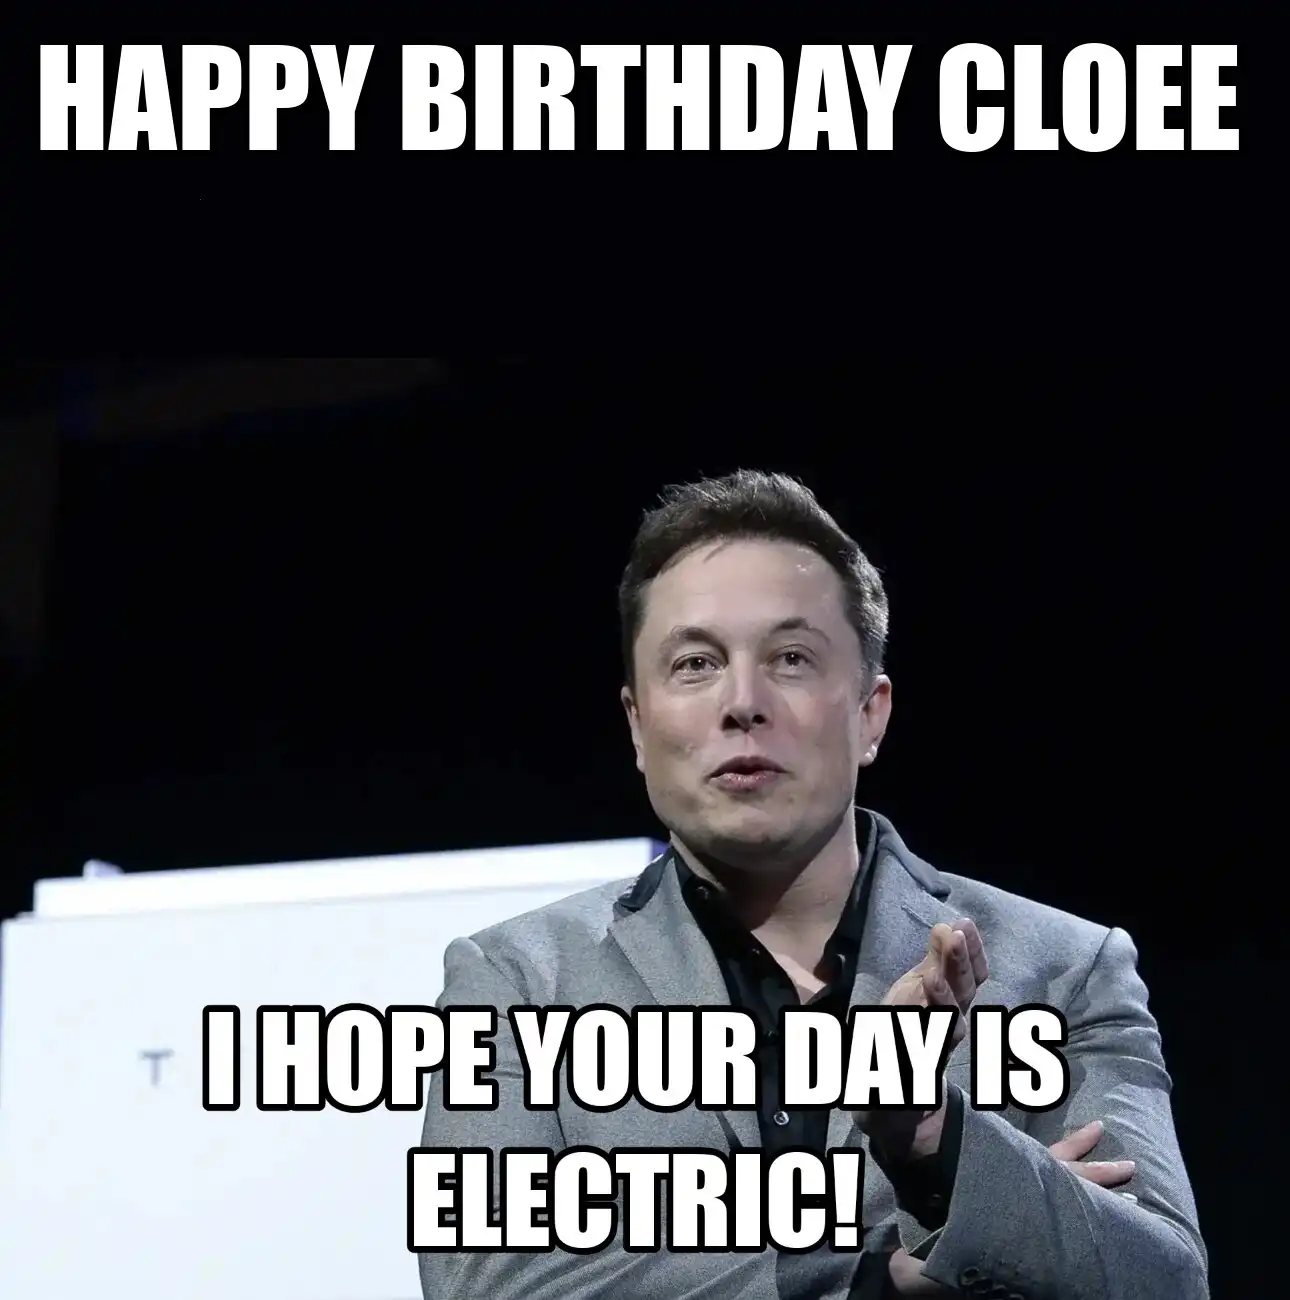 Happy Birthday Cloee I Hope Your Day Is Electric Meme